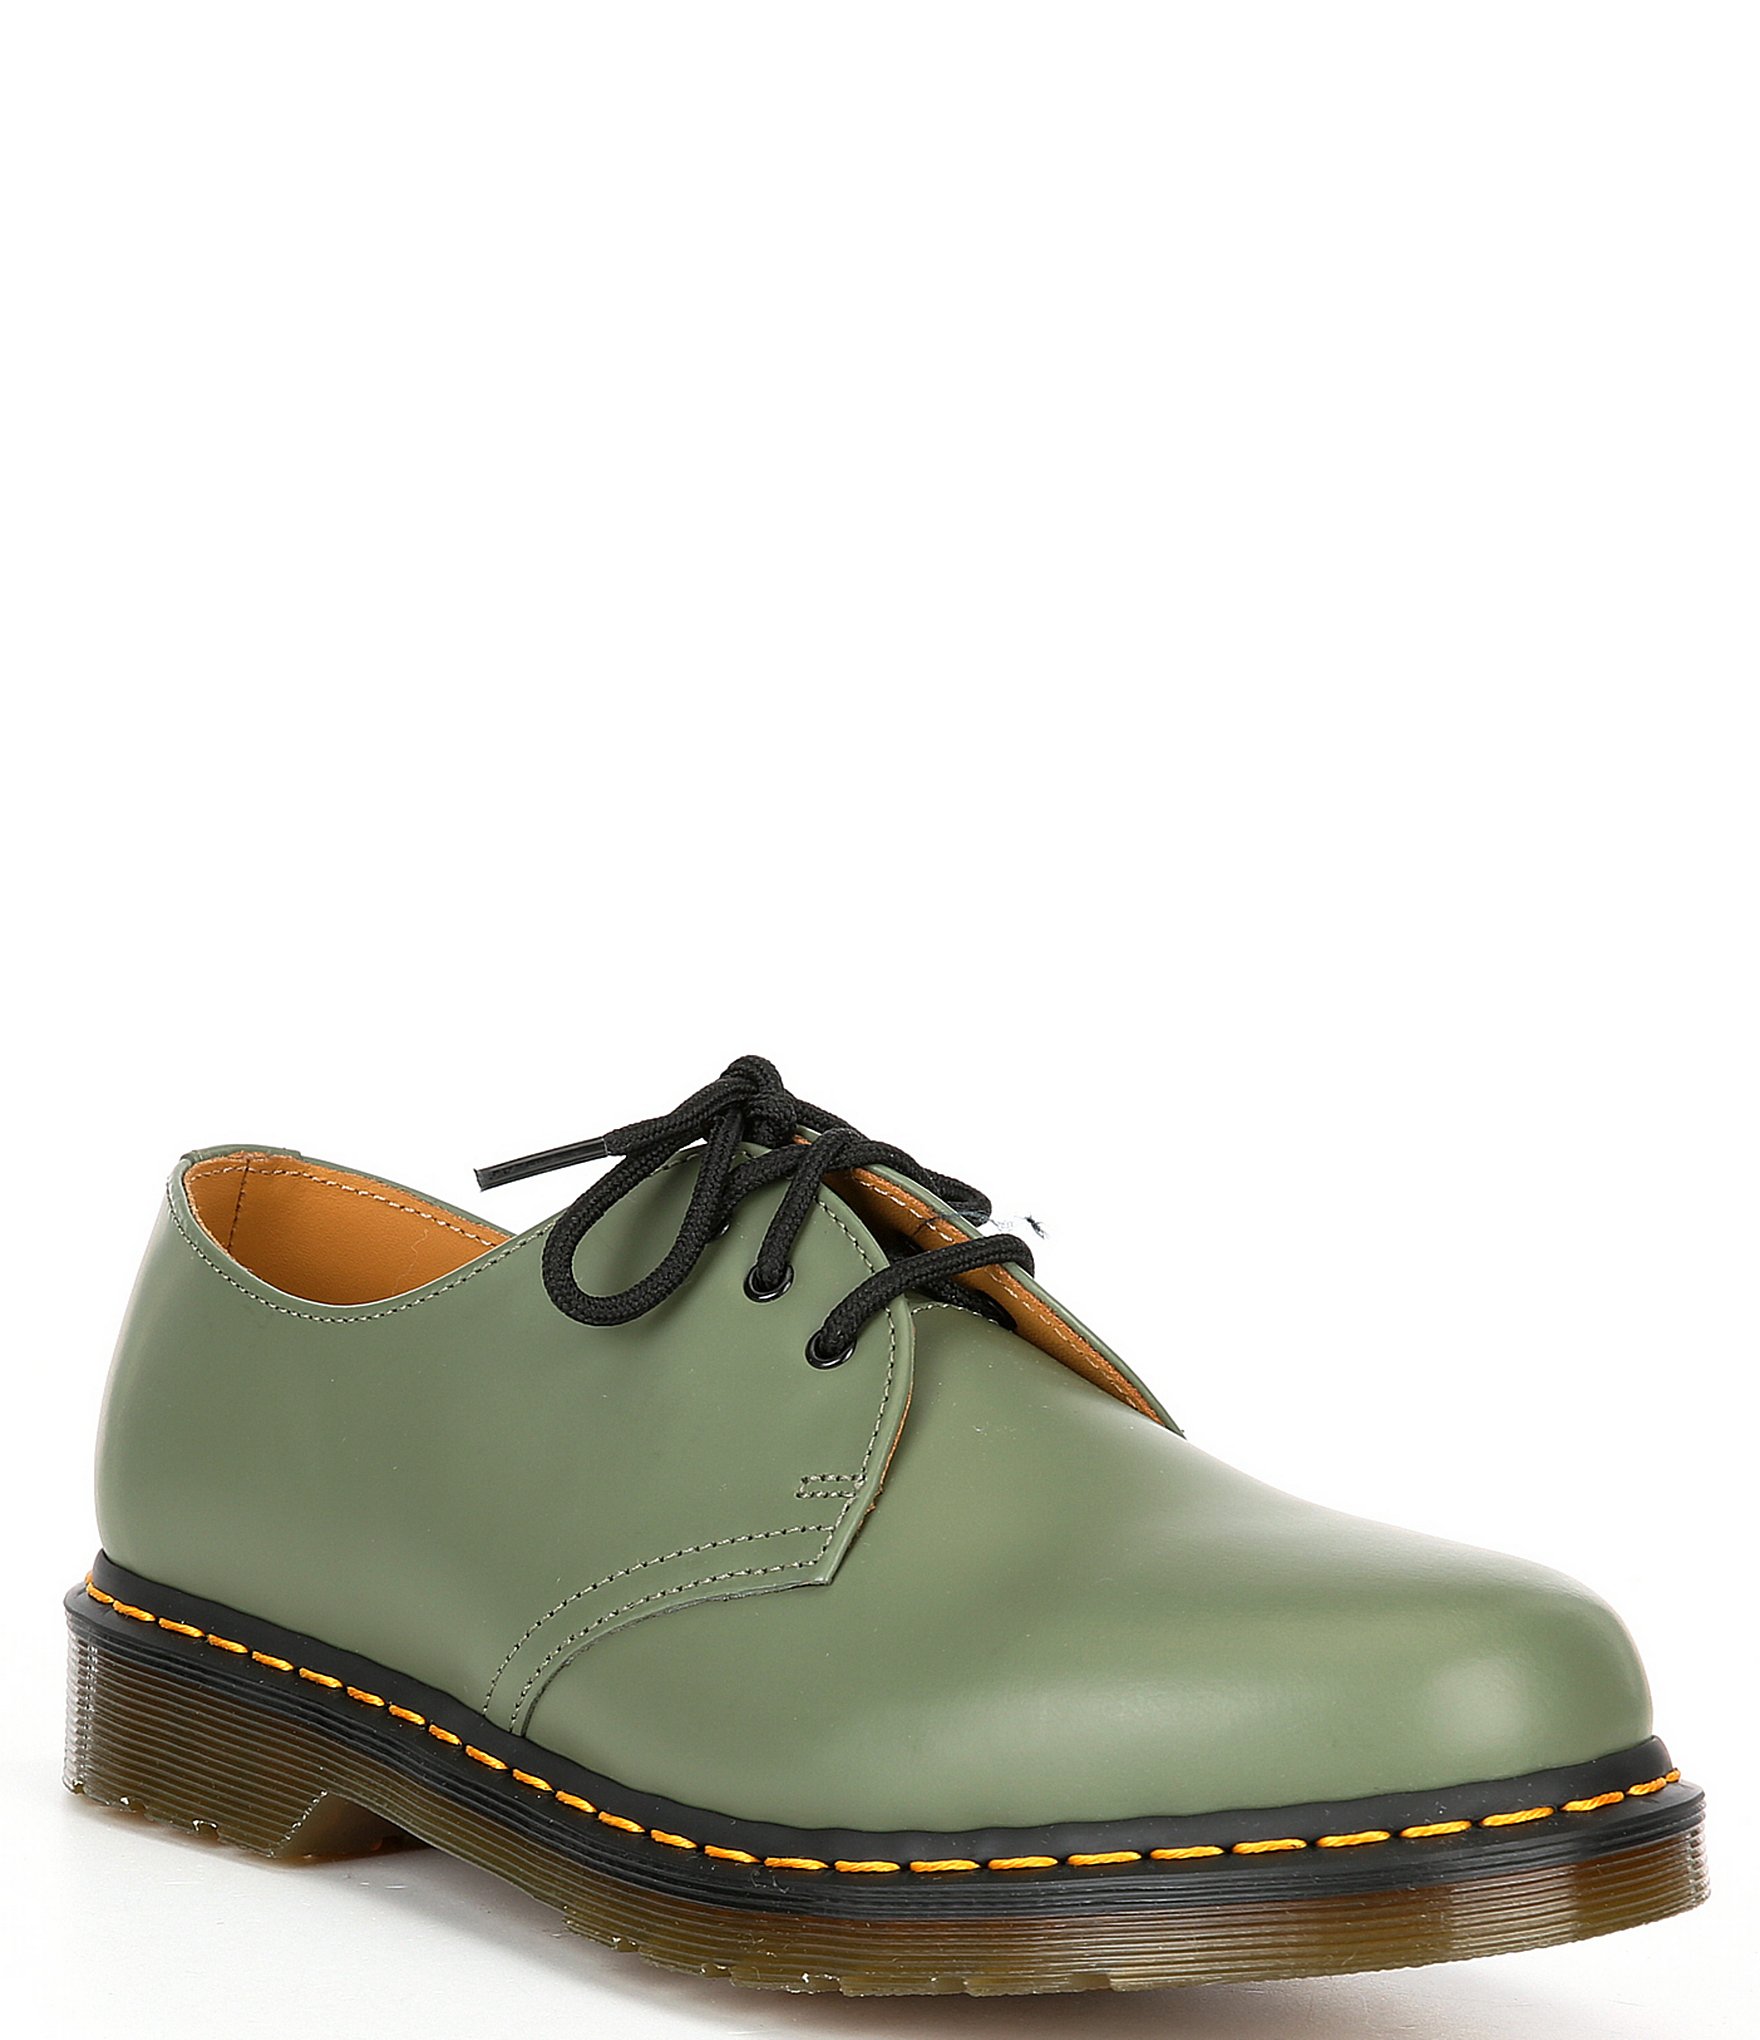 No way maximize promotion Dr. Martens Men's 1461 Smooth Leather Oxfords | Dillard's